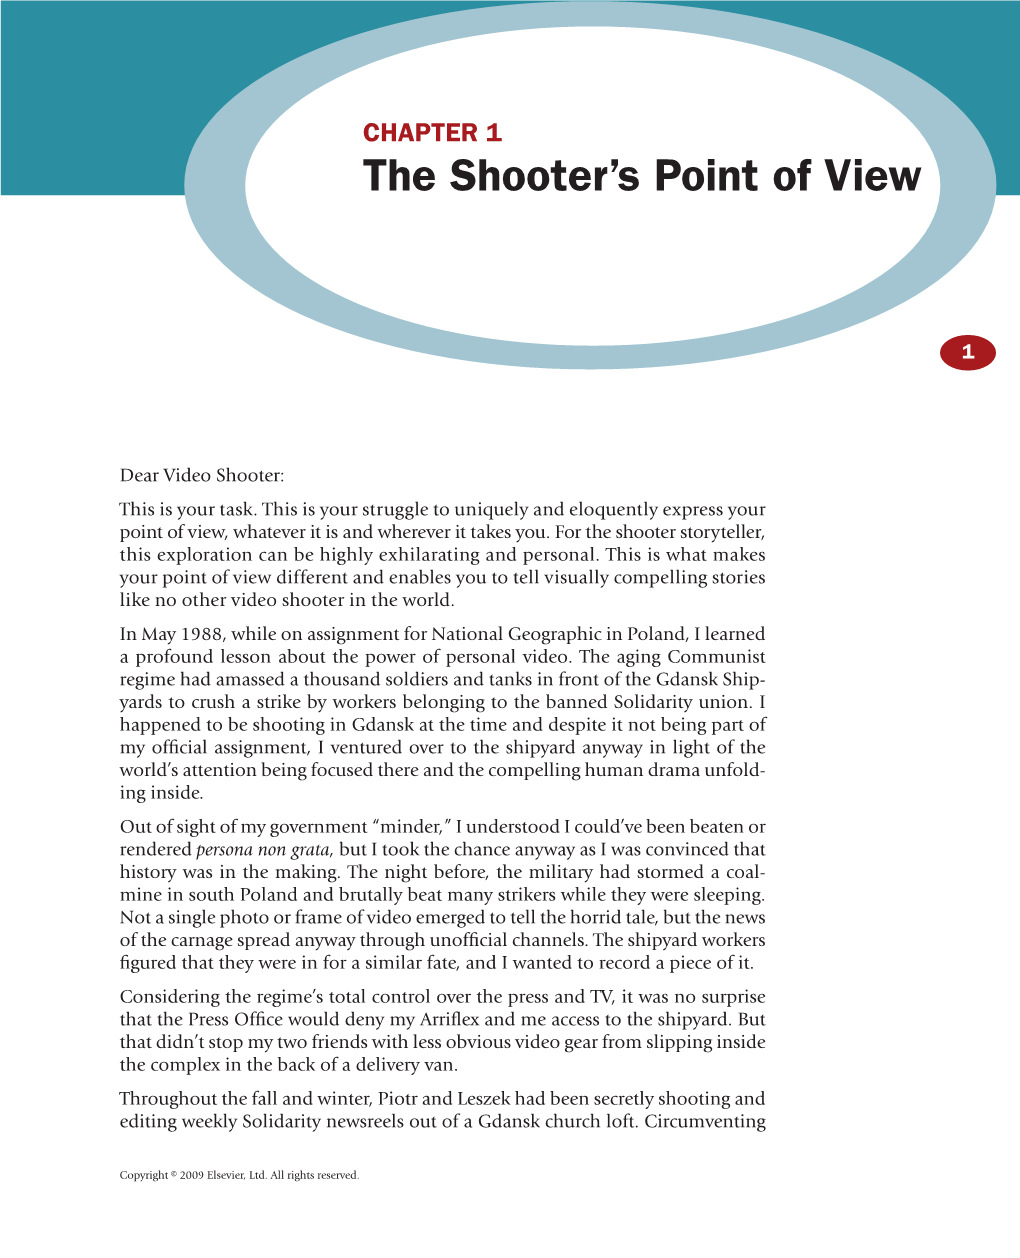 The Shooter's Point of View